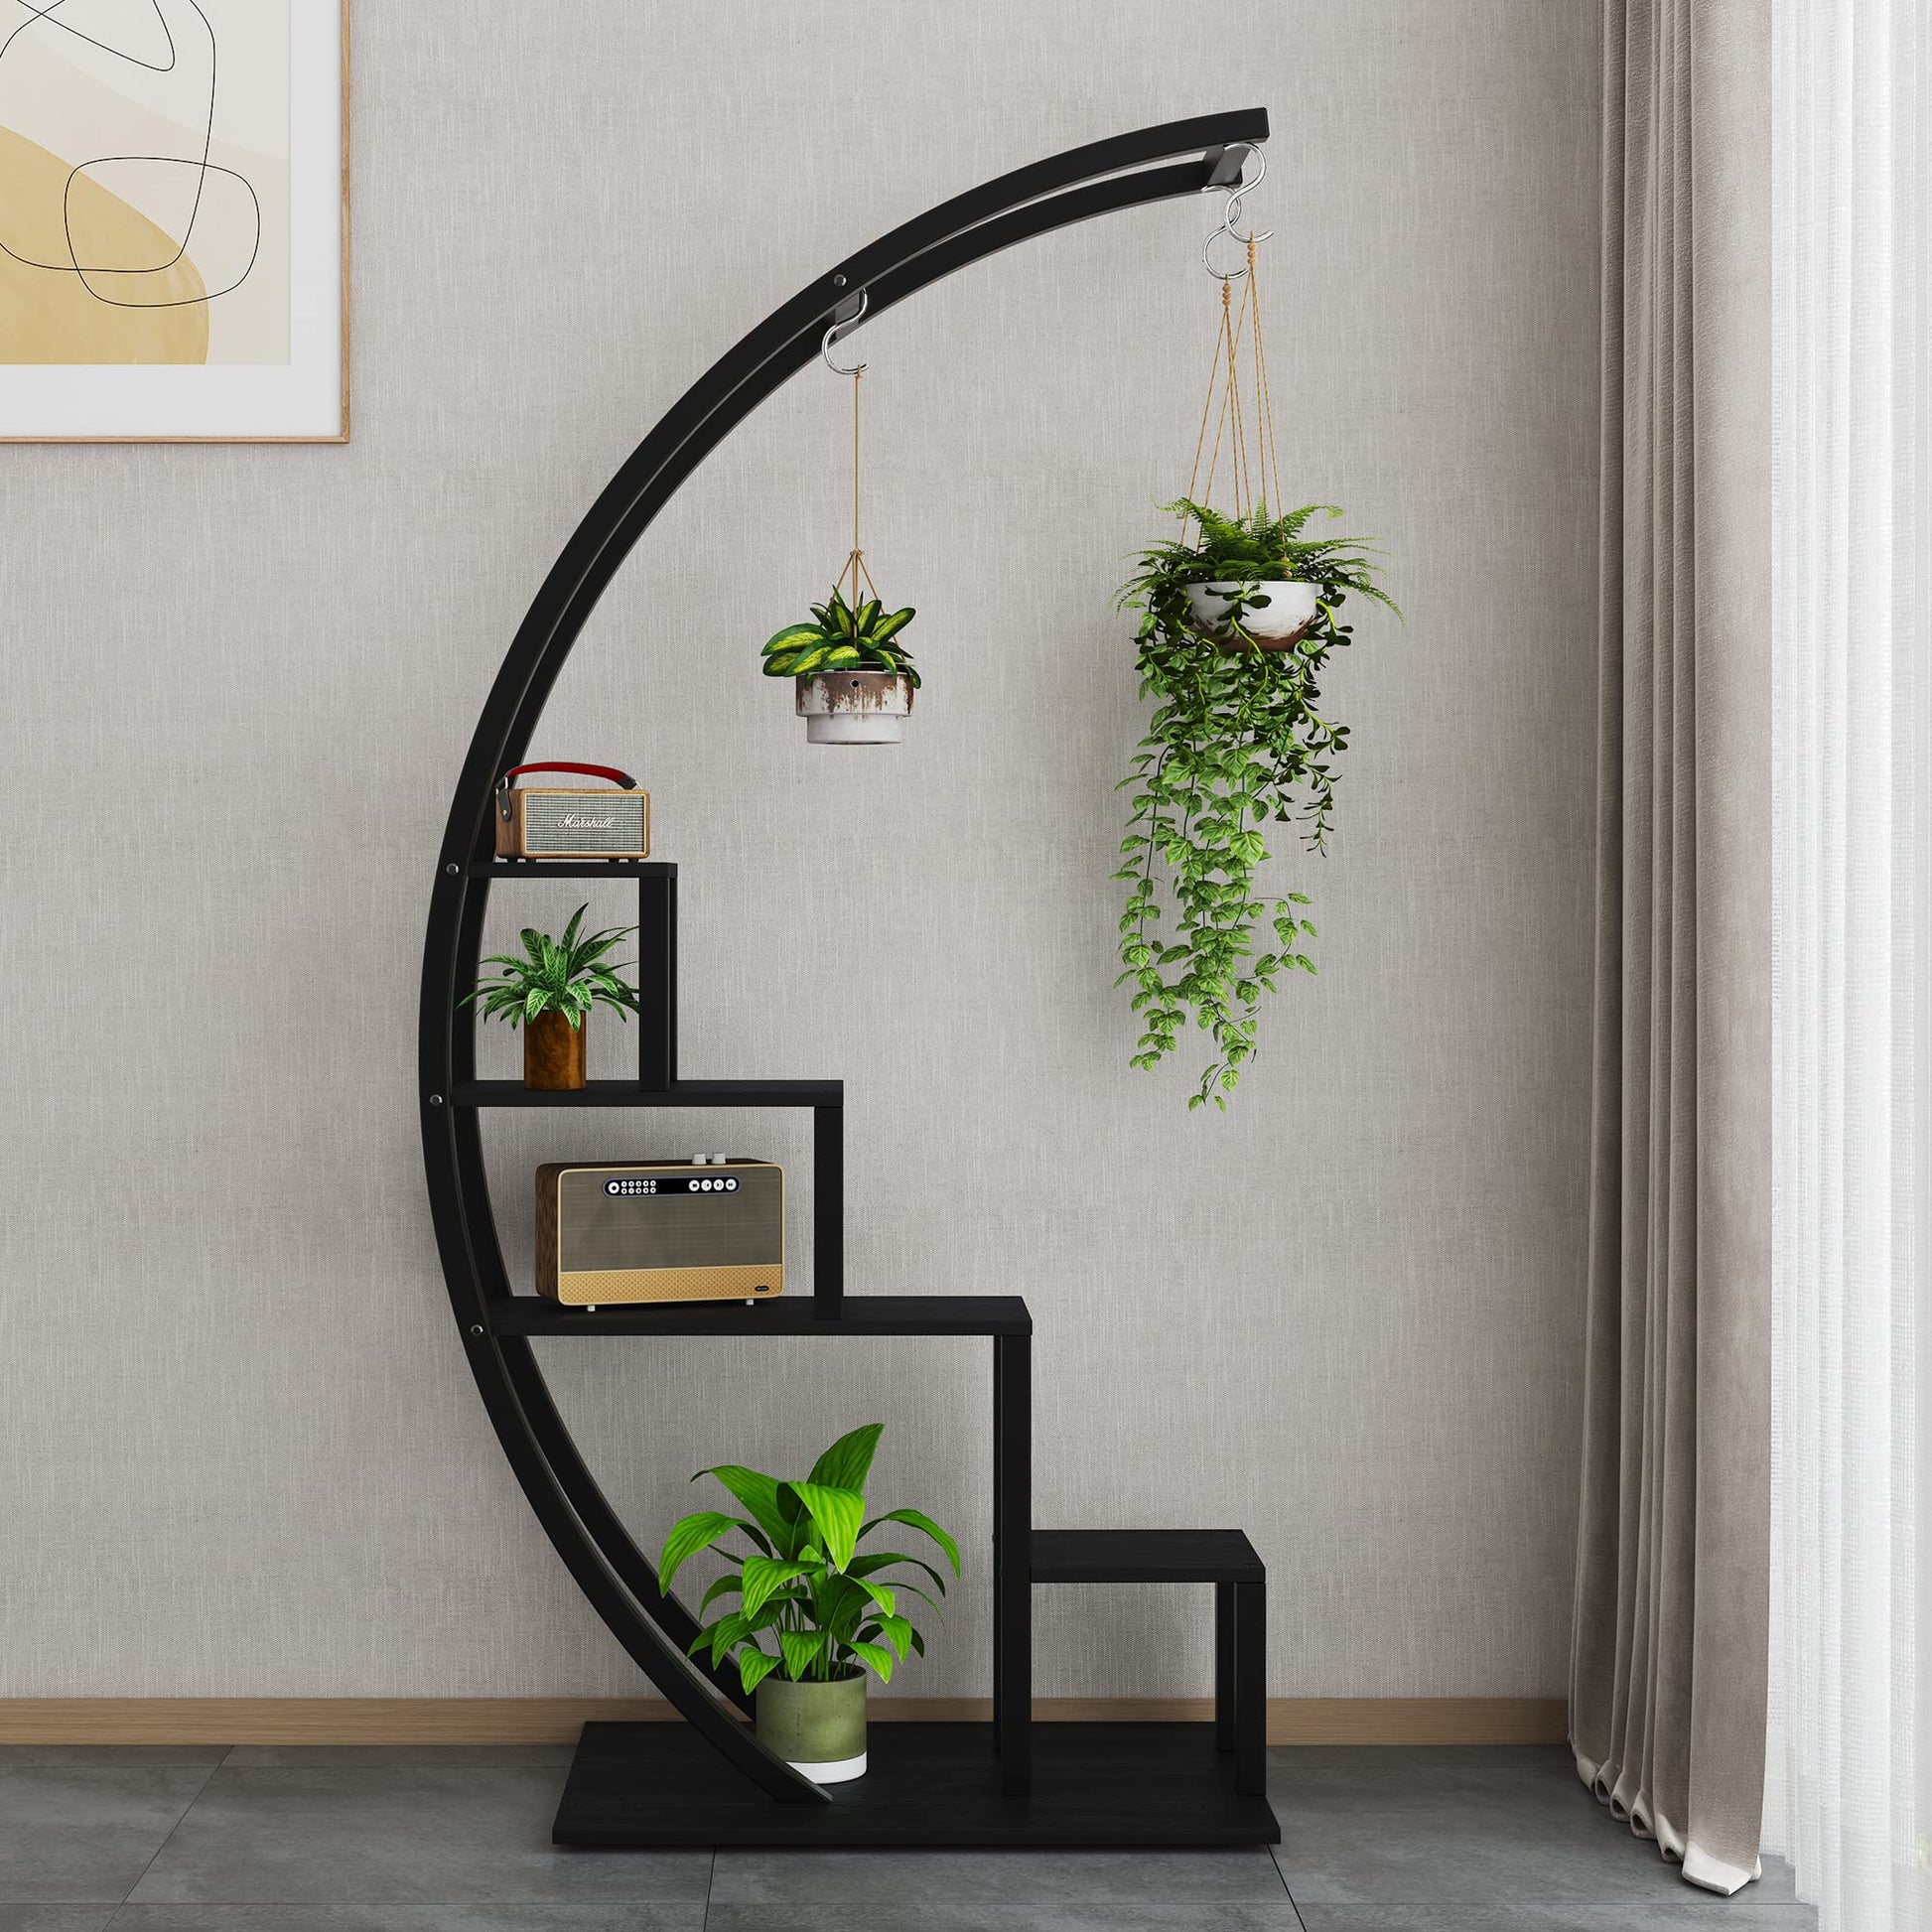 5-Tier Curved Metal Plant Stand with 6 Hooks for Balcony, Black